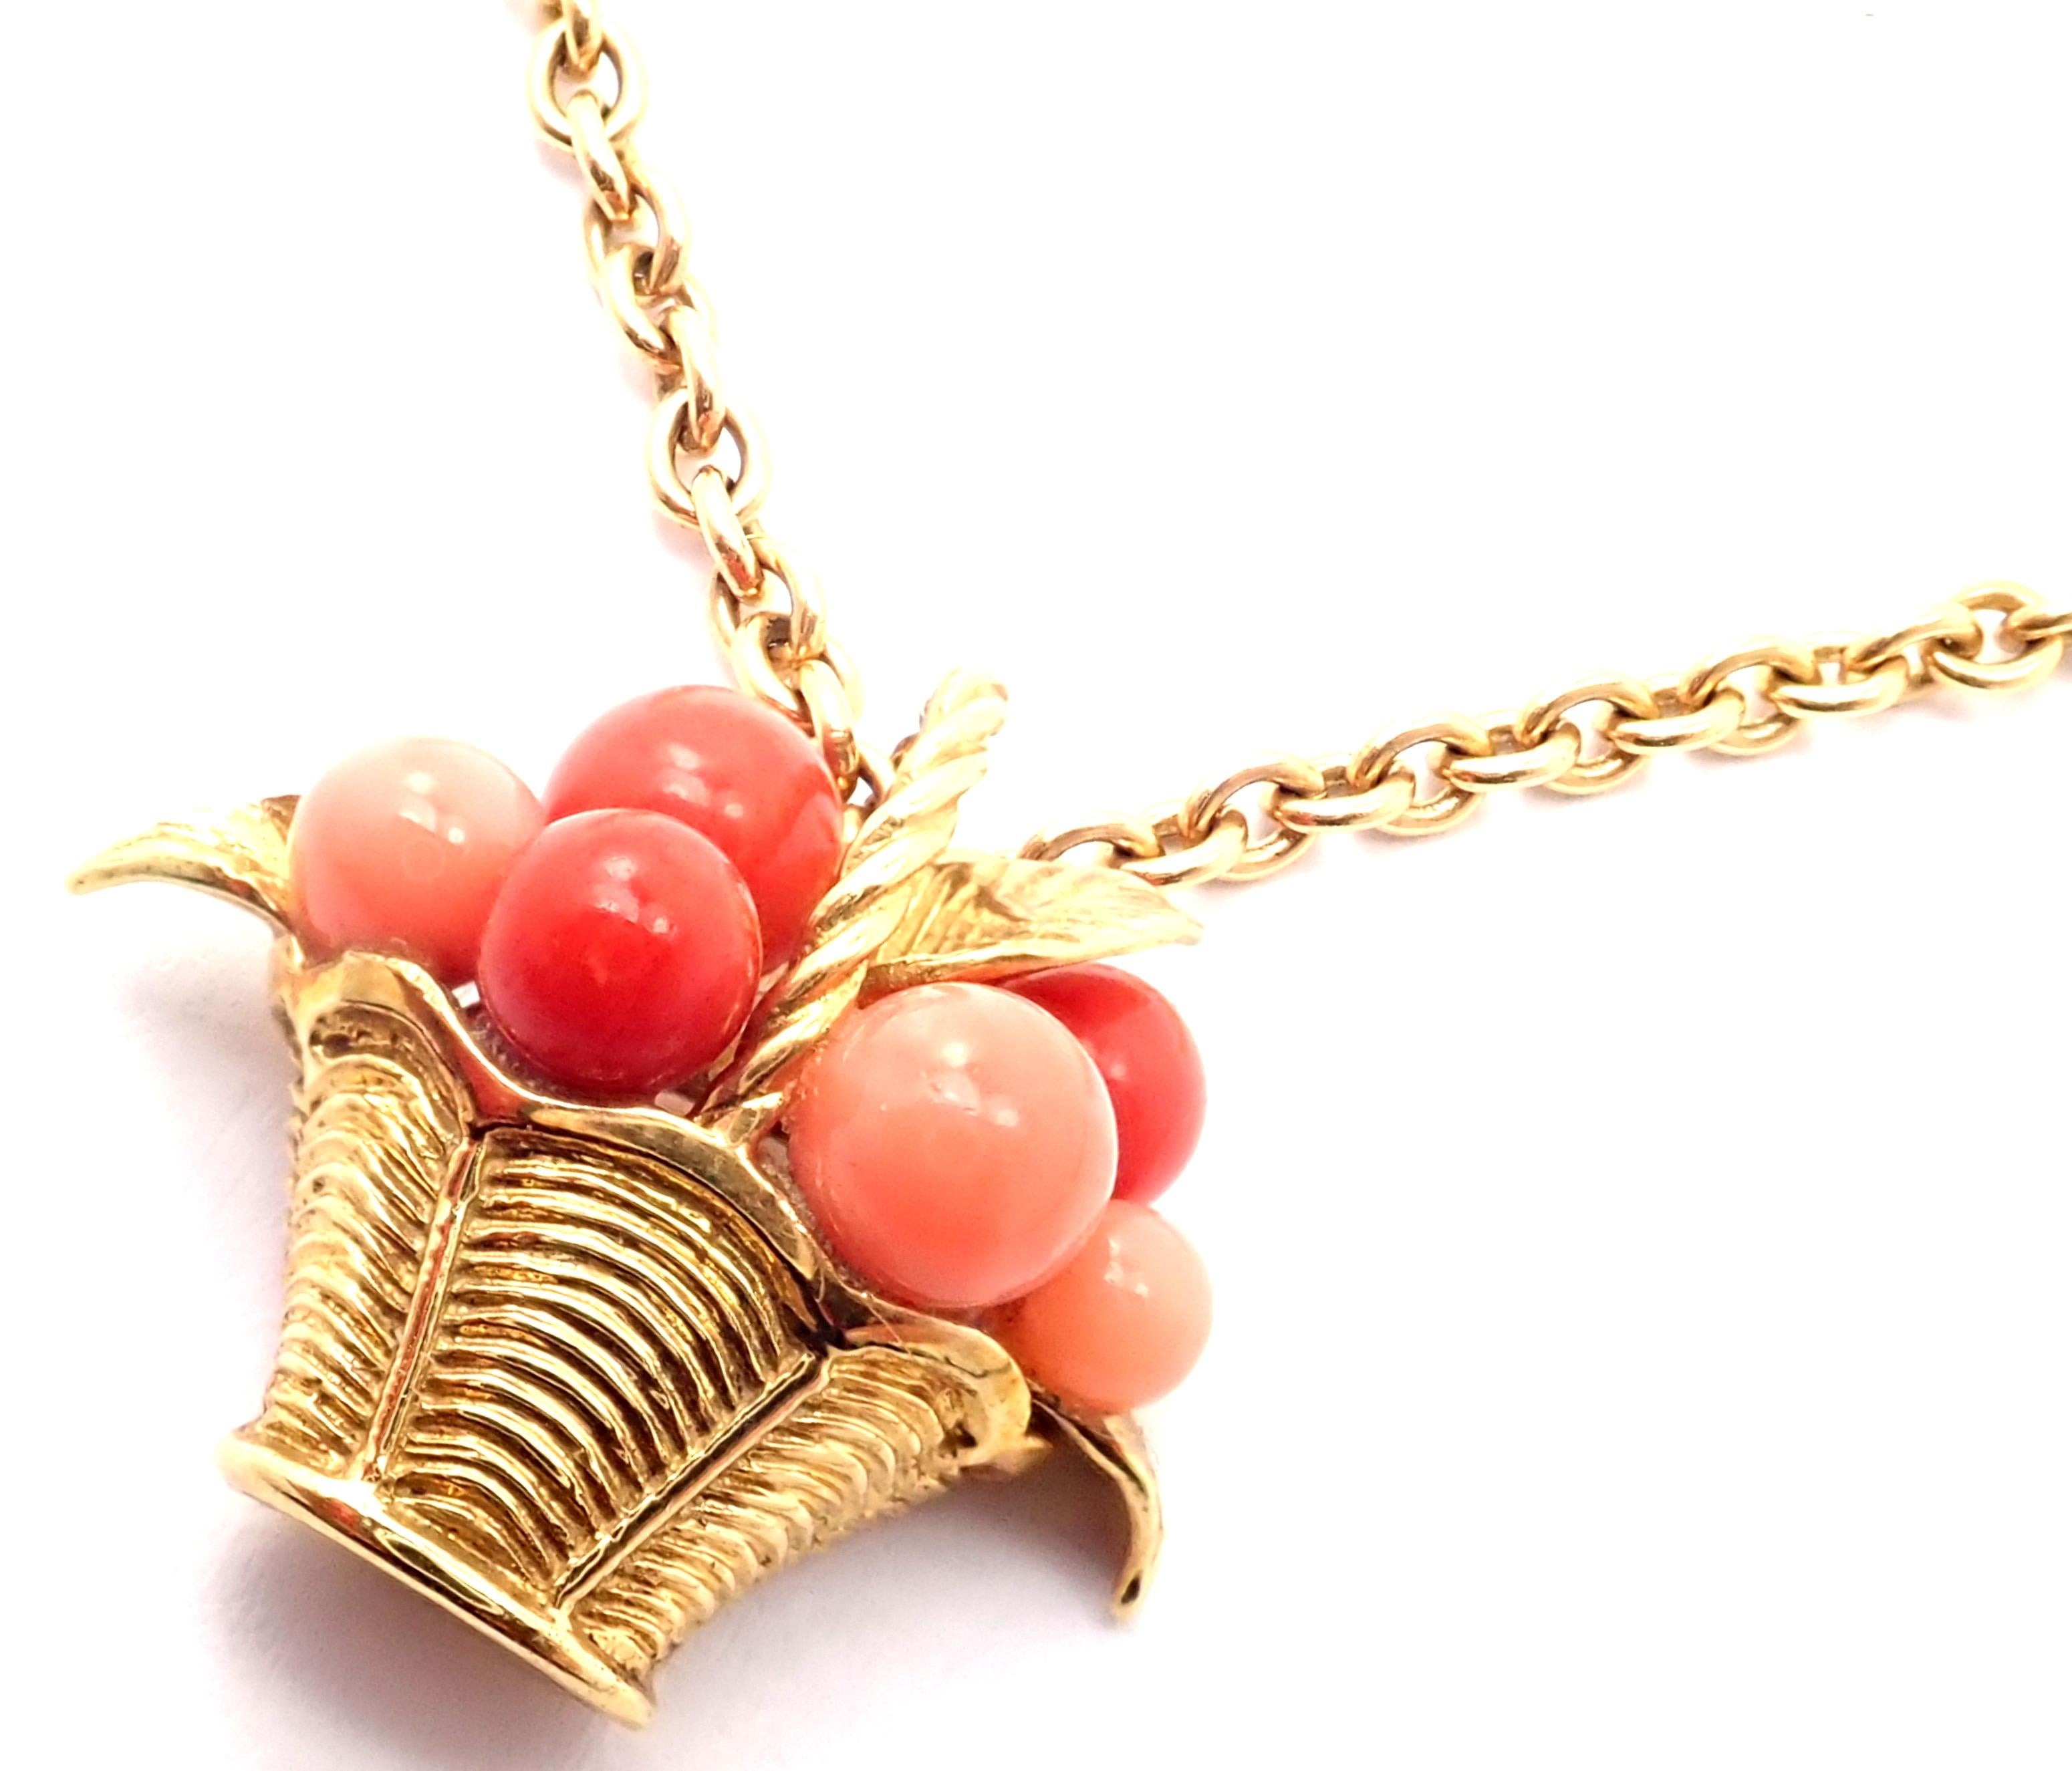 Van Cleef & Arpels Coral Bead Fruit Basket Yellow Gold Pendant Necklace For Sale 5